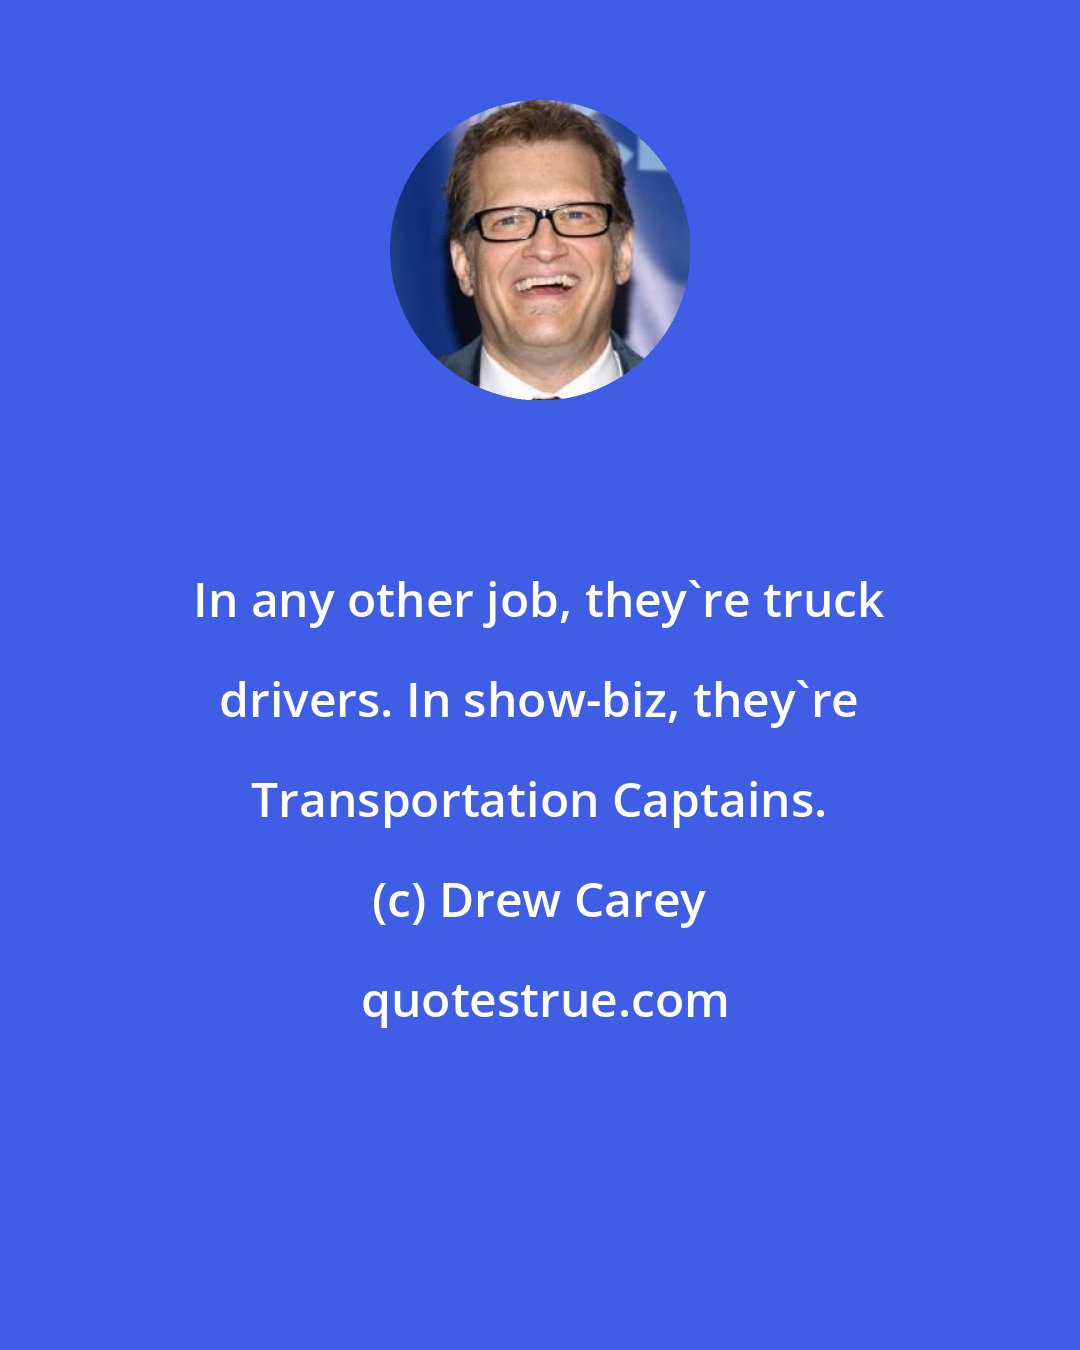 Drew Carey: In any other job, they're truck drivers. In show-biz, they're Transportation Captains.